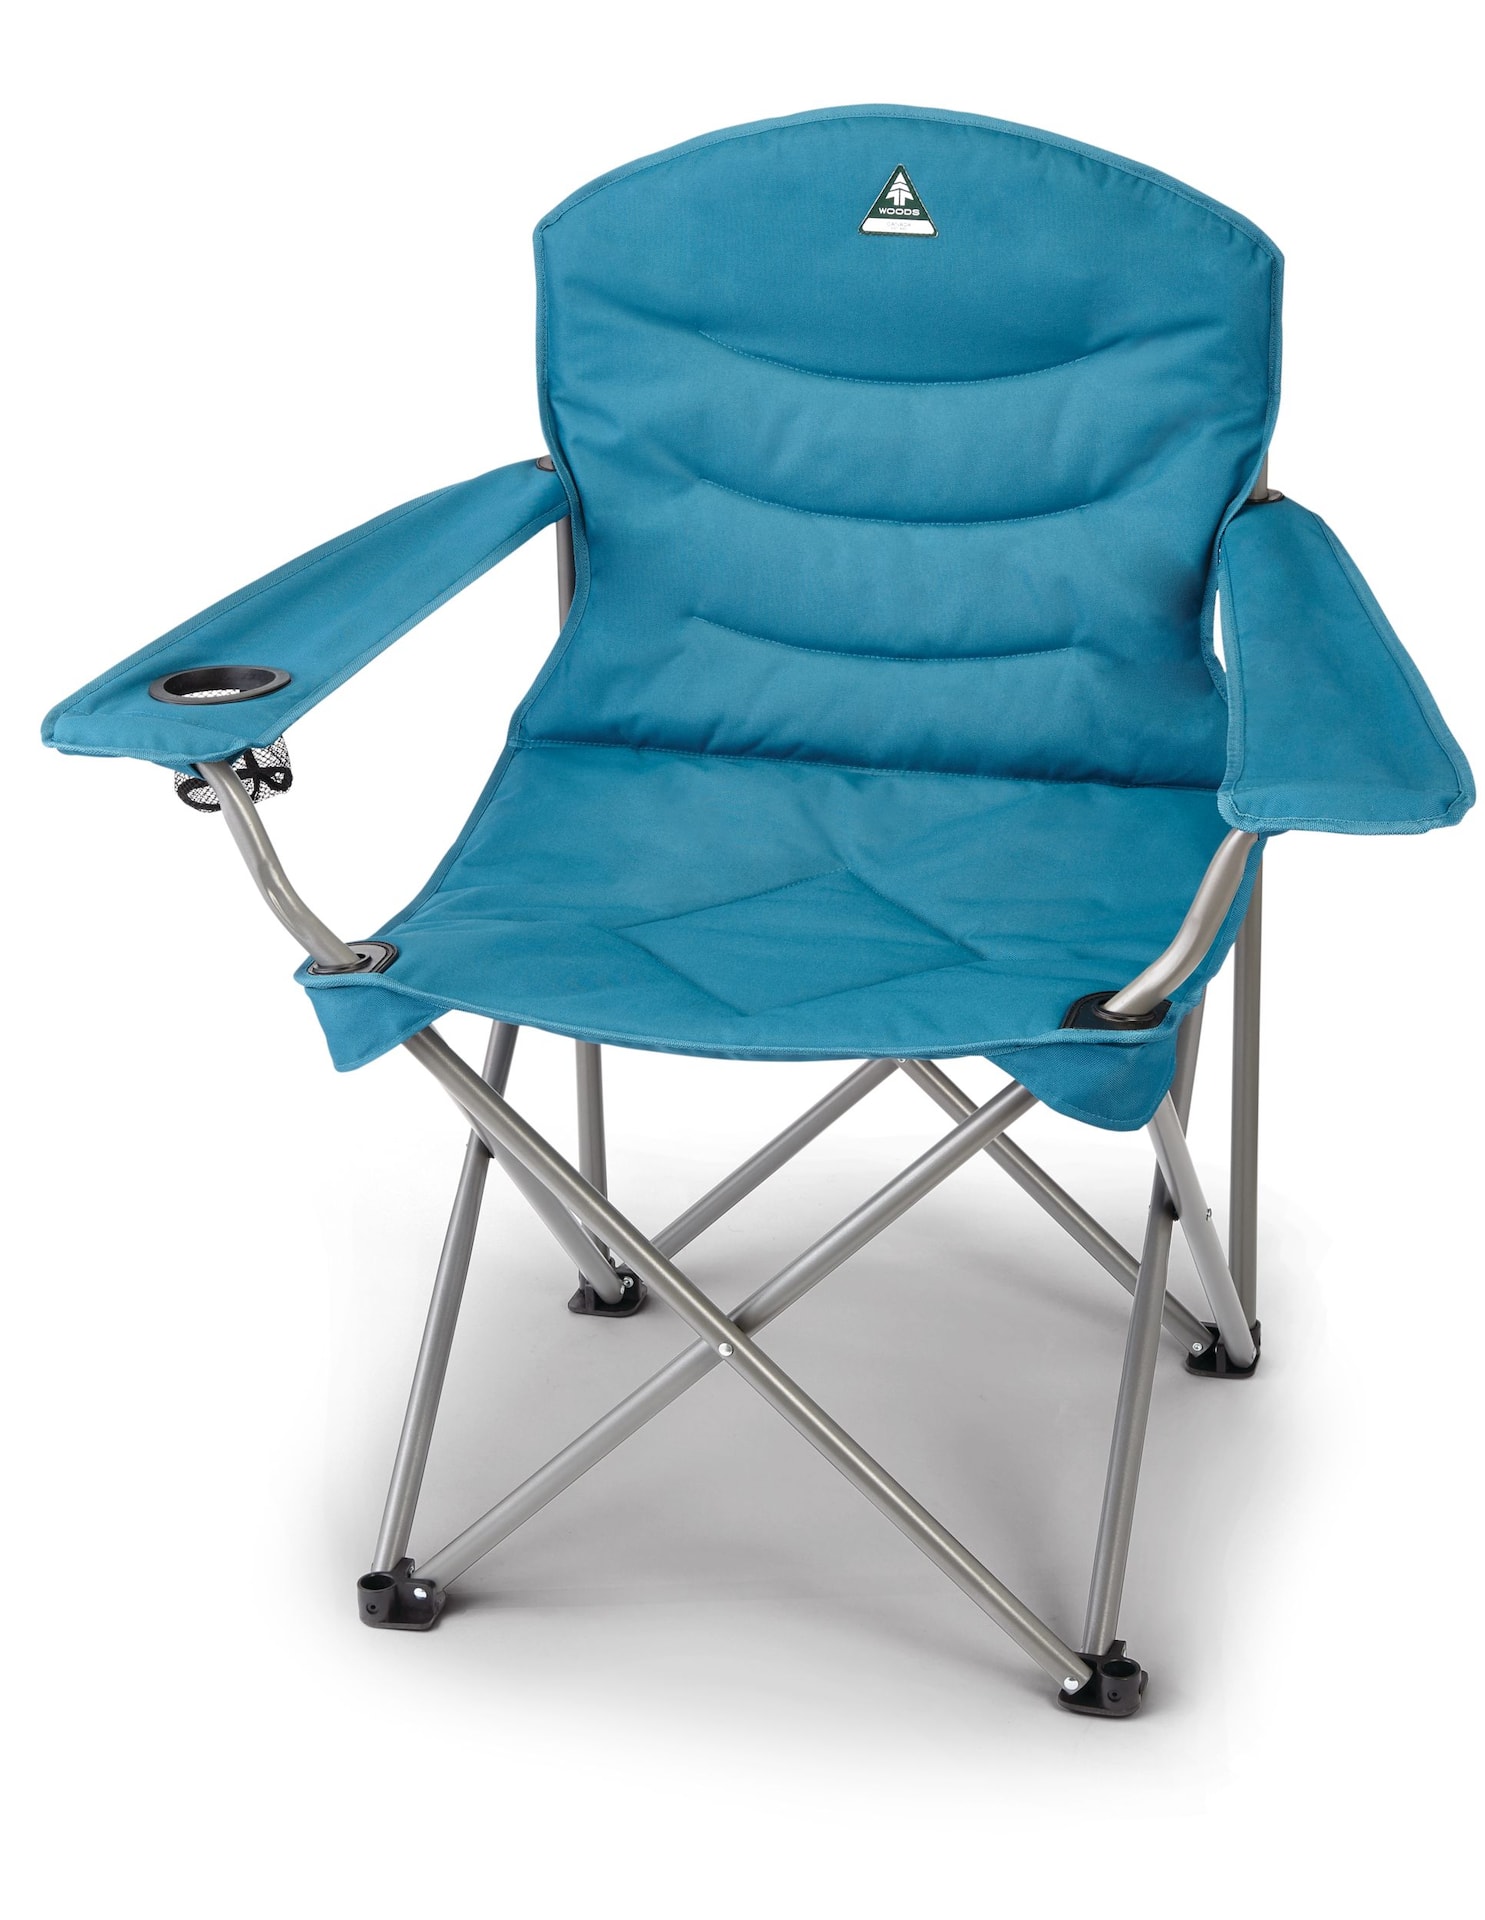 Woods Explorer Oversized Padded Portable Folding Camping Quad Chair w/ Cup  Holder & Carry Bag